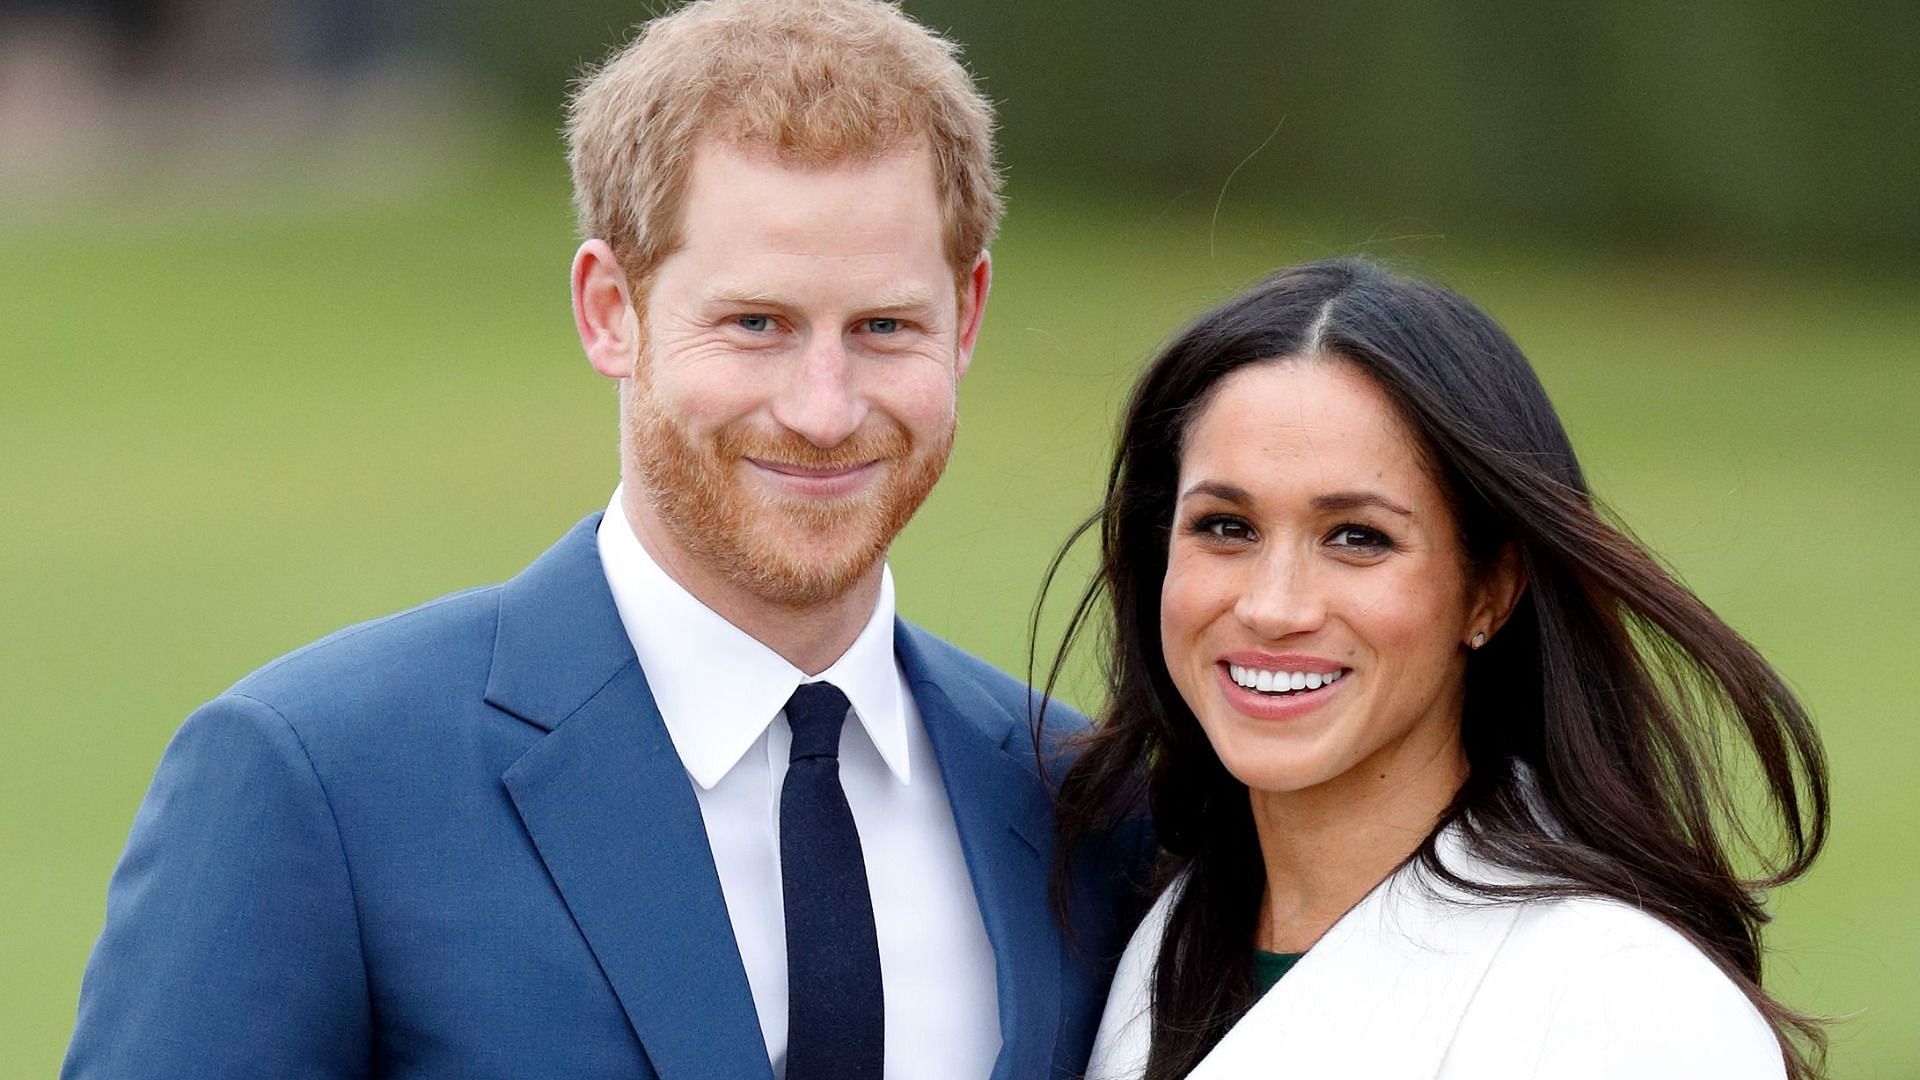 Meghan Markle and Prince Harry quietly volunteered throughout Los Angeles, distributing meals and assisting in back-to-school drives during the pandemic (Image via Getty Images/Karwai Tang)